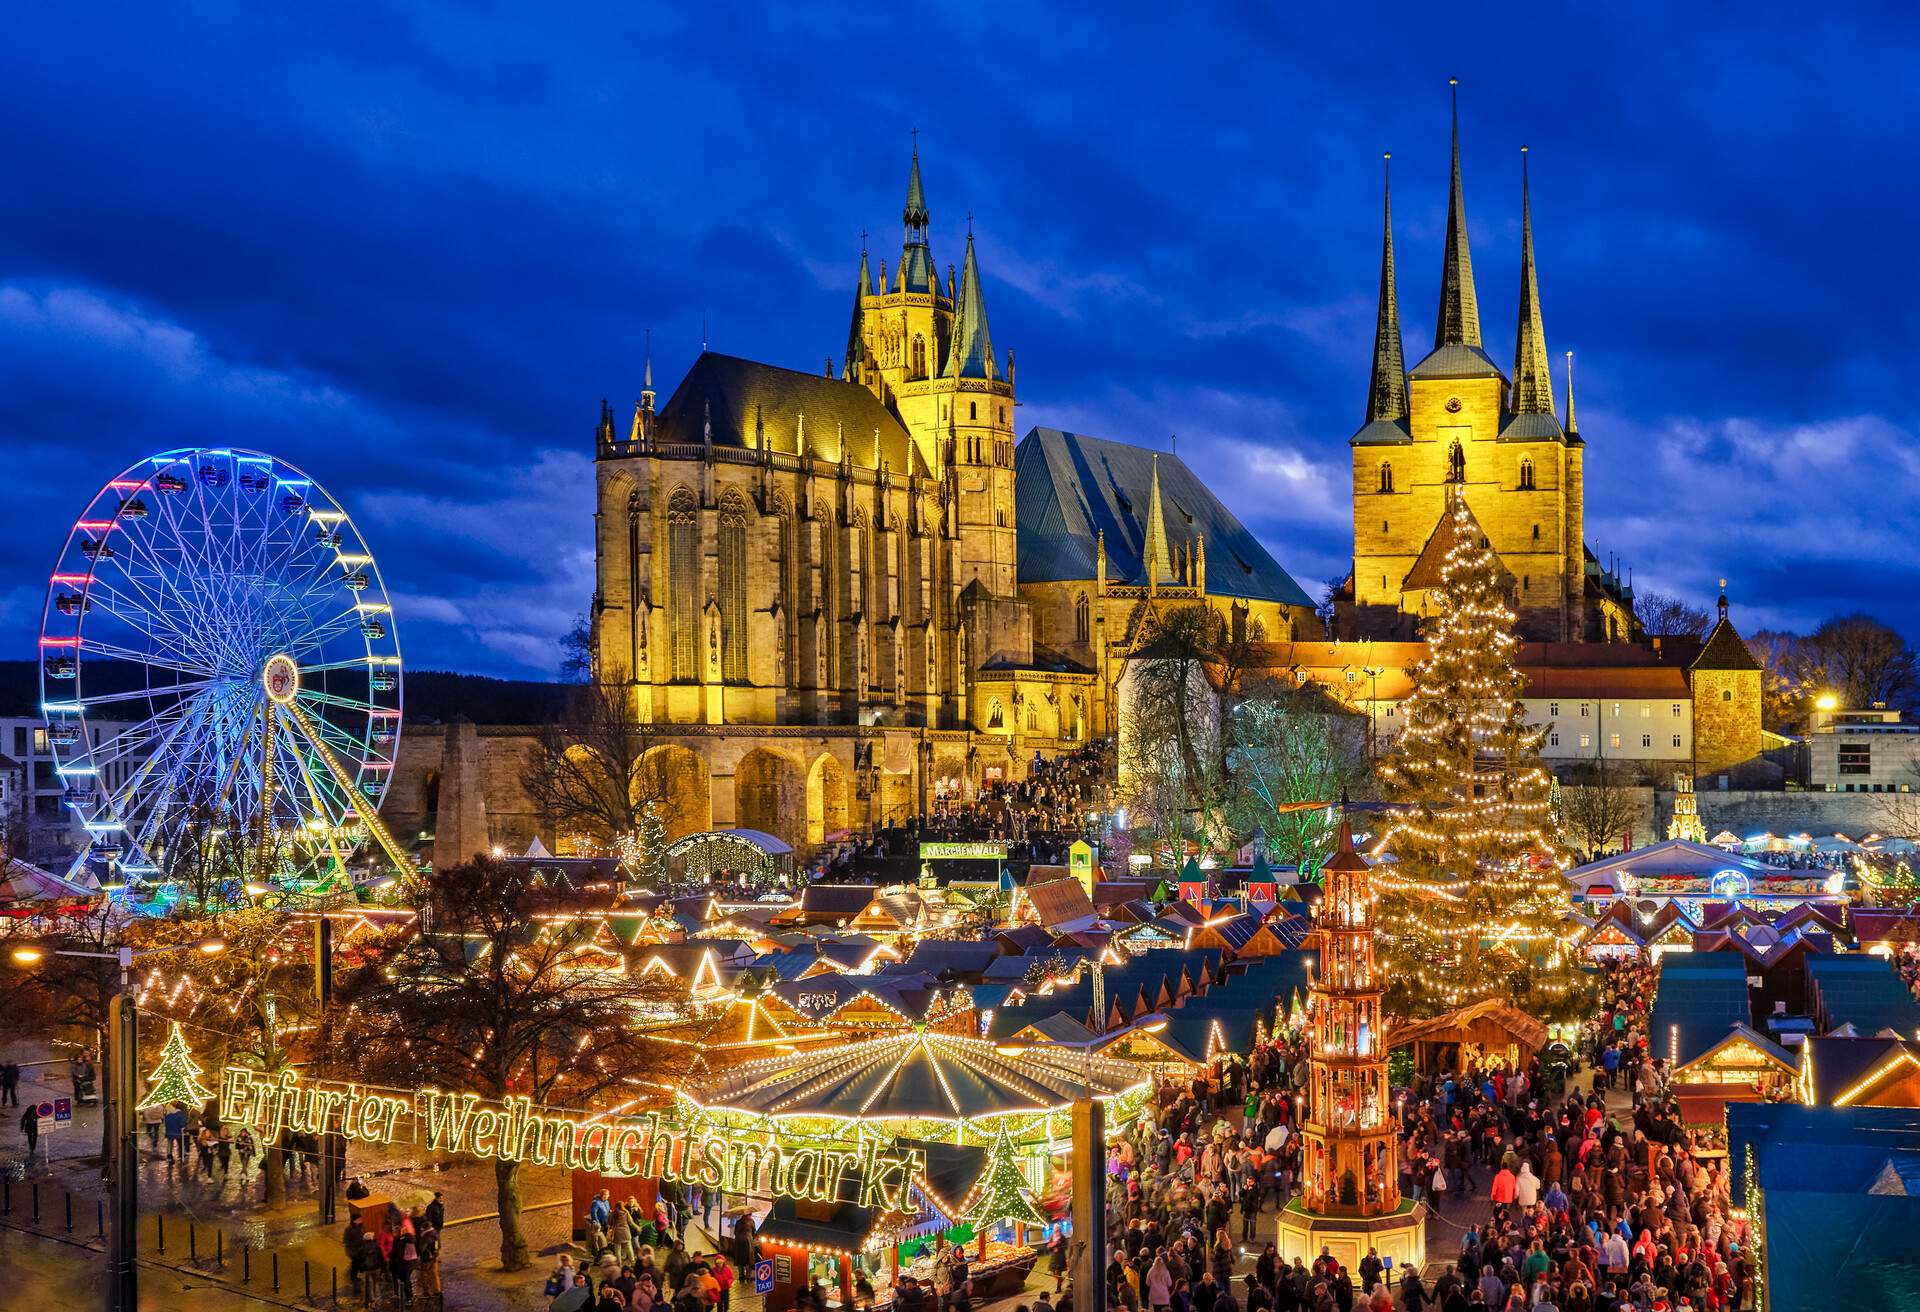 DEST_GERMANY_ERFURT_CHRISTMAS_GettyImages-1086417494